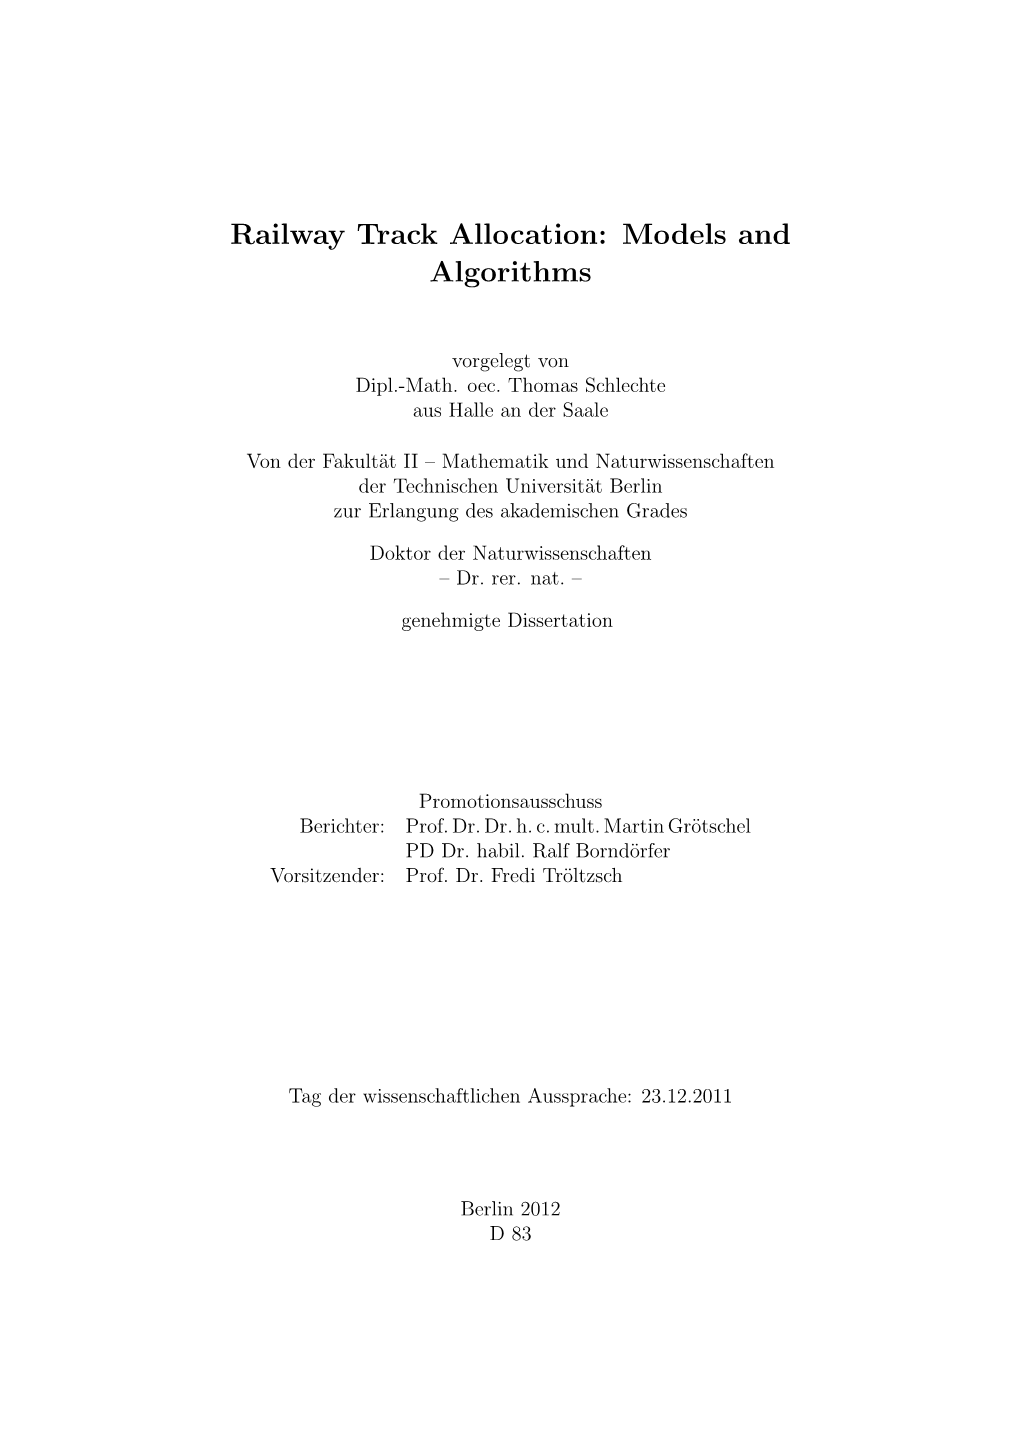 Railway Track Allocation – Models and Algorithms